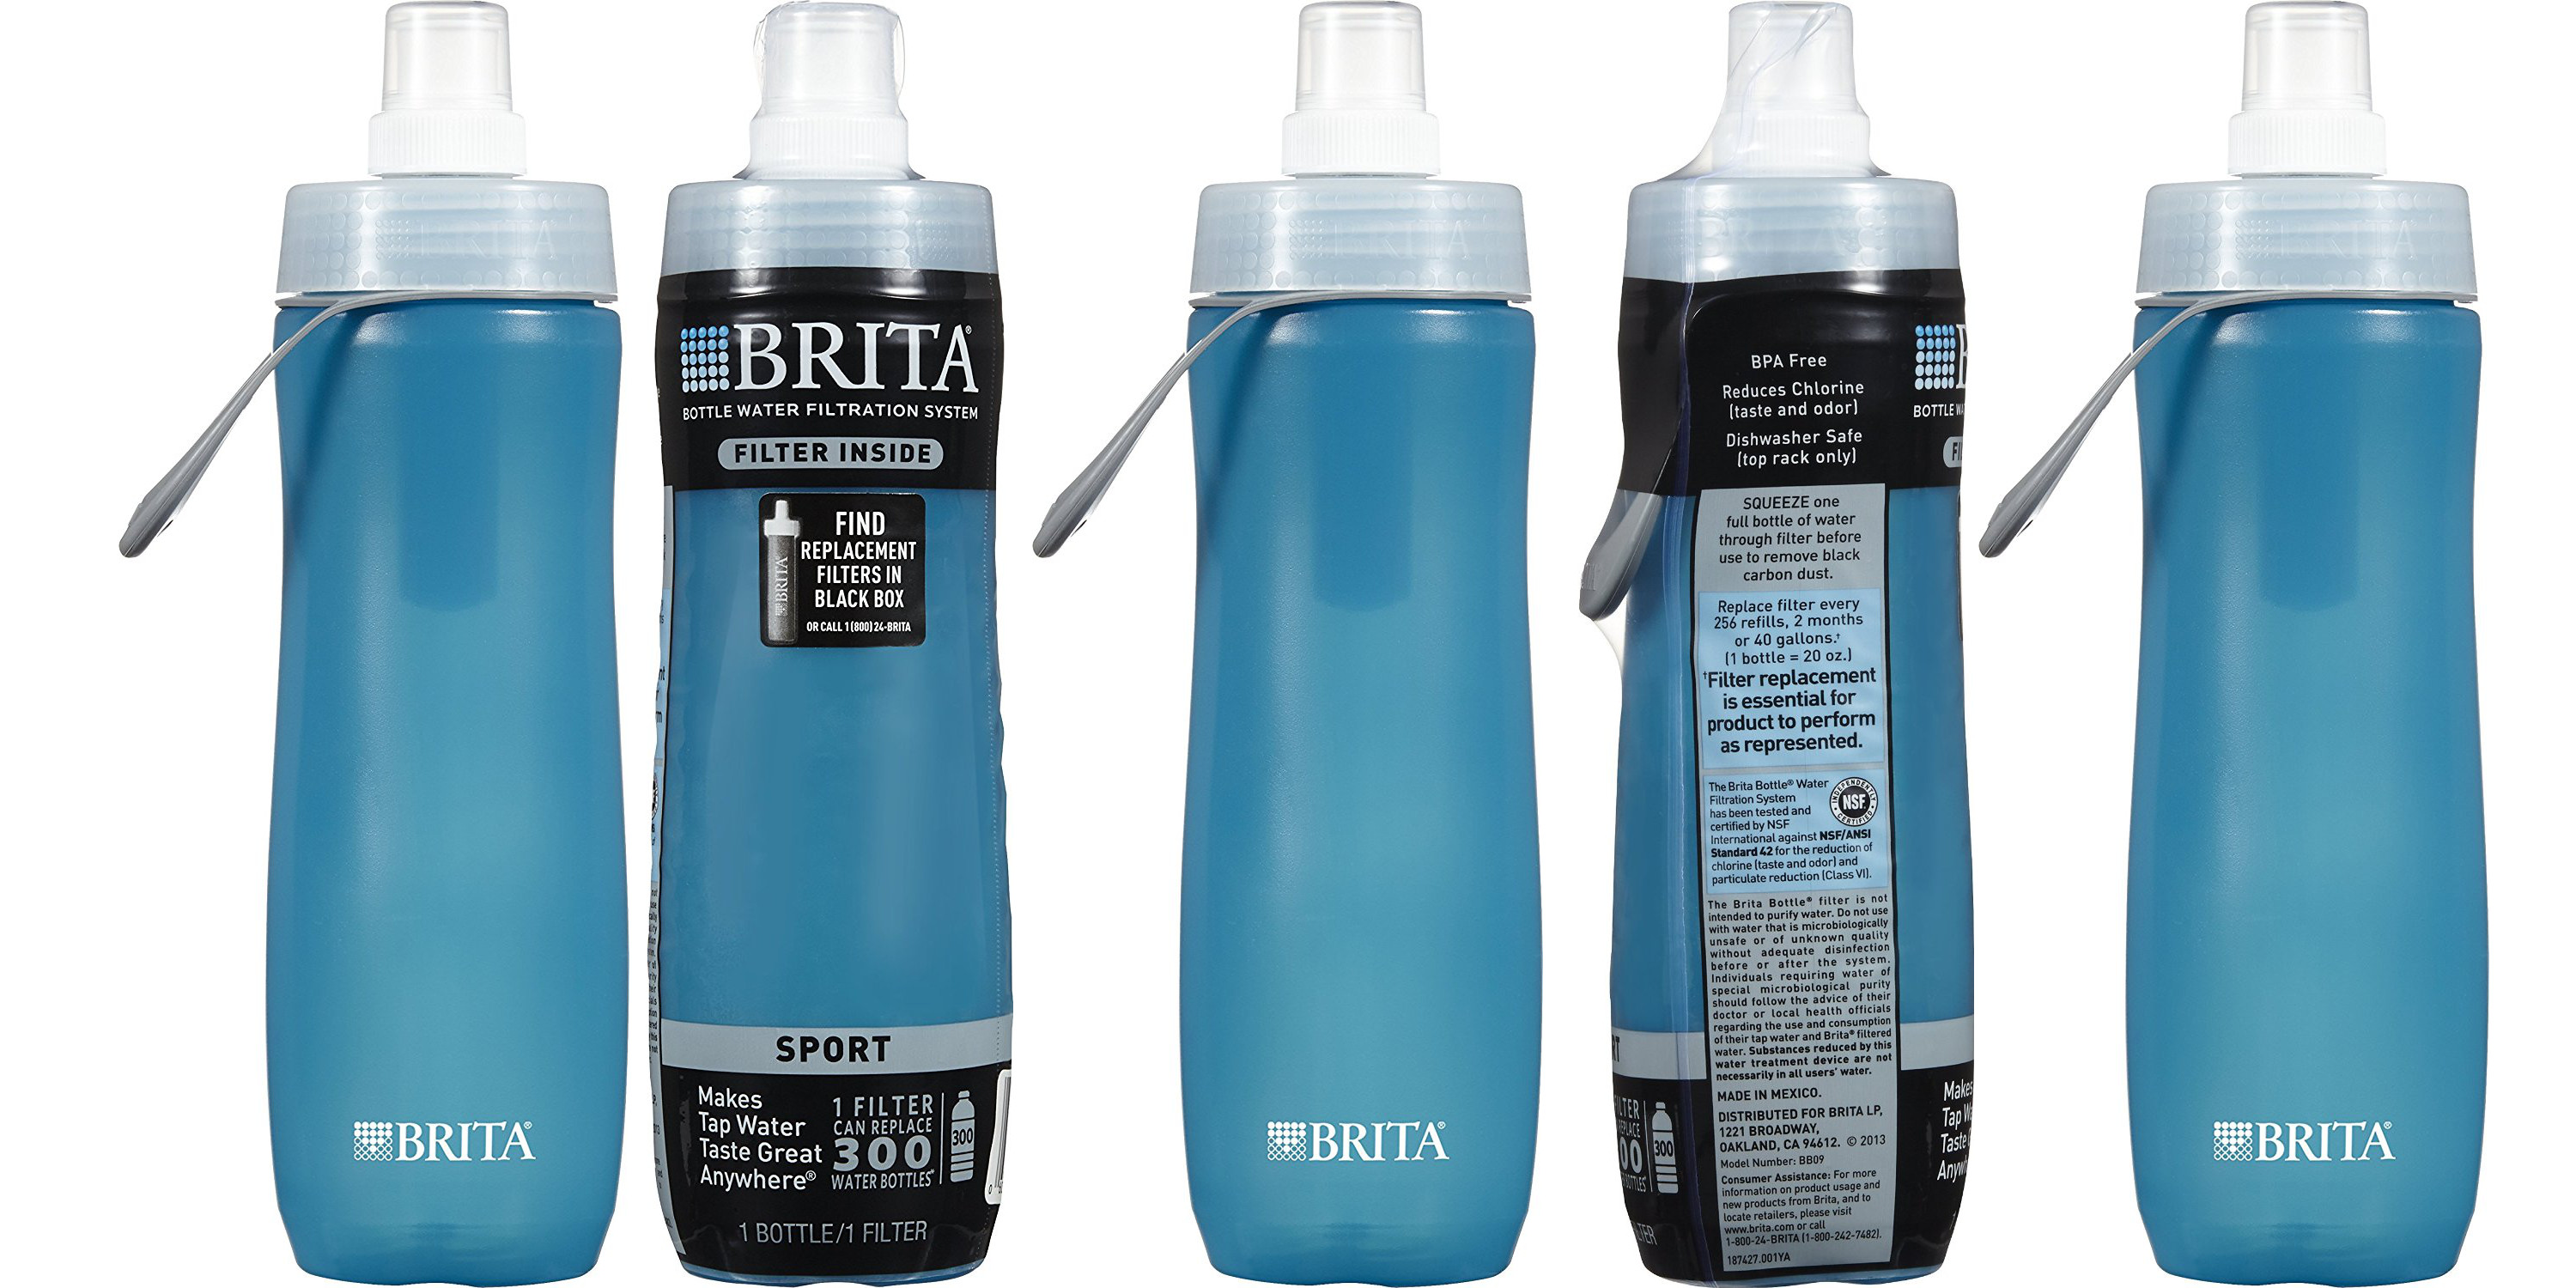 https://9to5toys.com/wp-content/uploads/sites/5/2017/04/brita-20-ounce-sport-water-filter-bottle-1.jpg?quality=82&strip=all